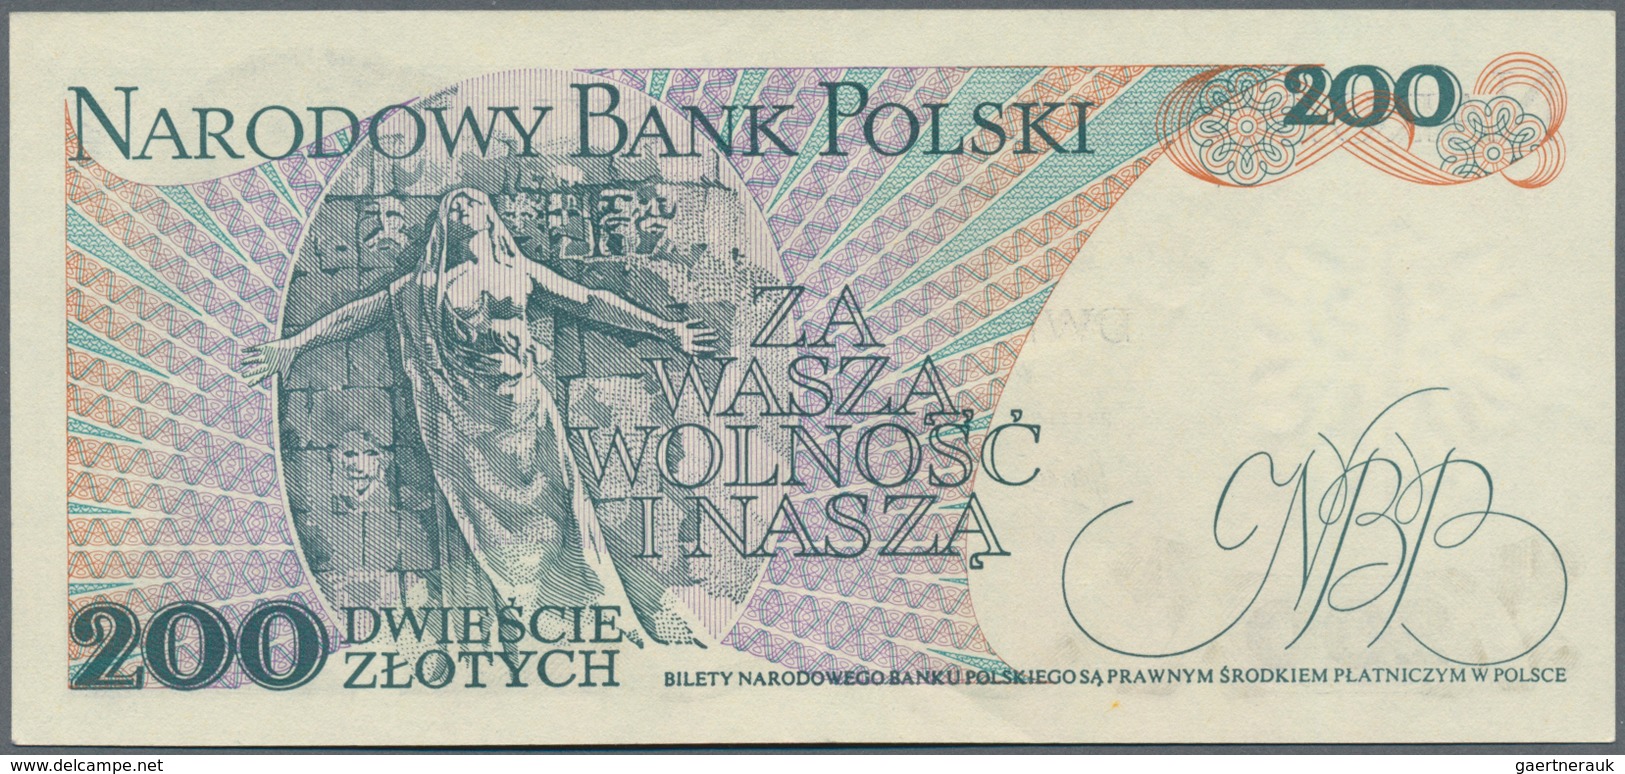 Poland / Polen: Very nice set with 23 Banknotes 10 - 200.000 Zlotych 1975-1989, P.142a-155a in F+ to